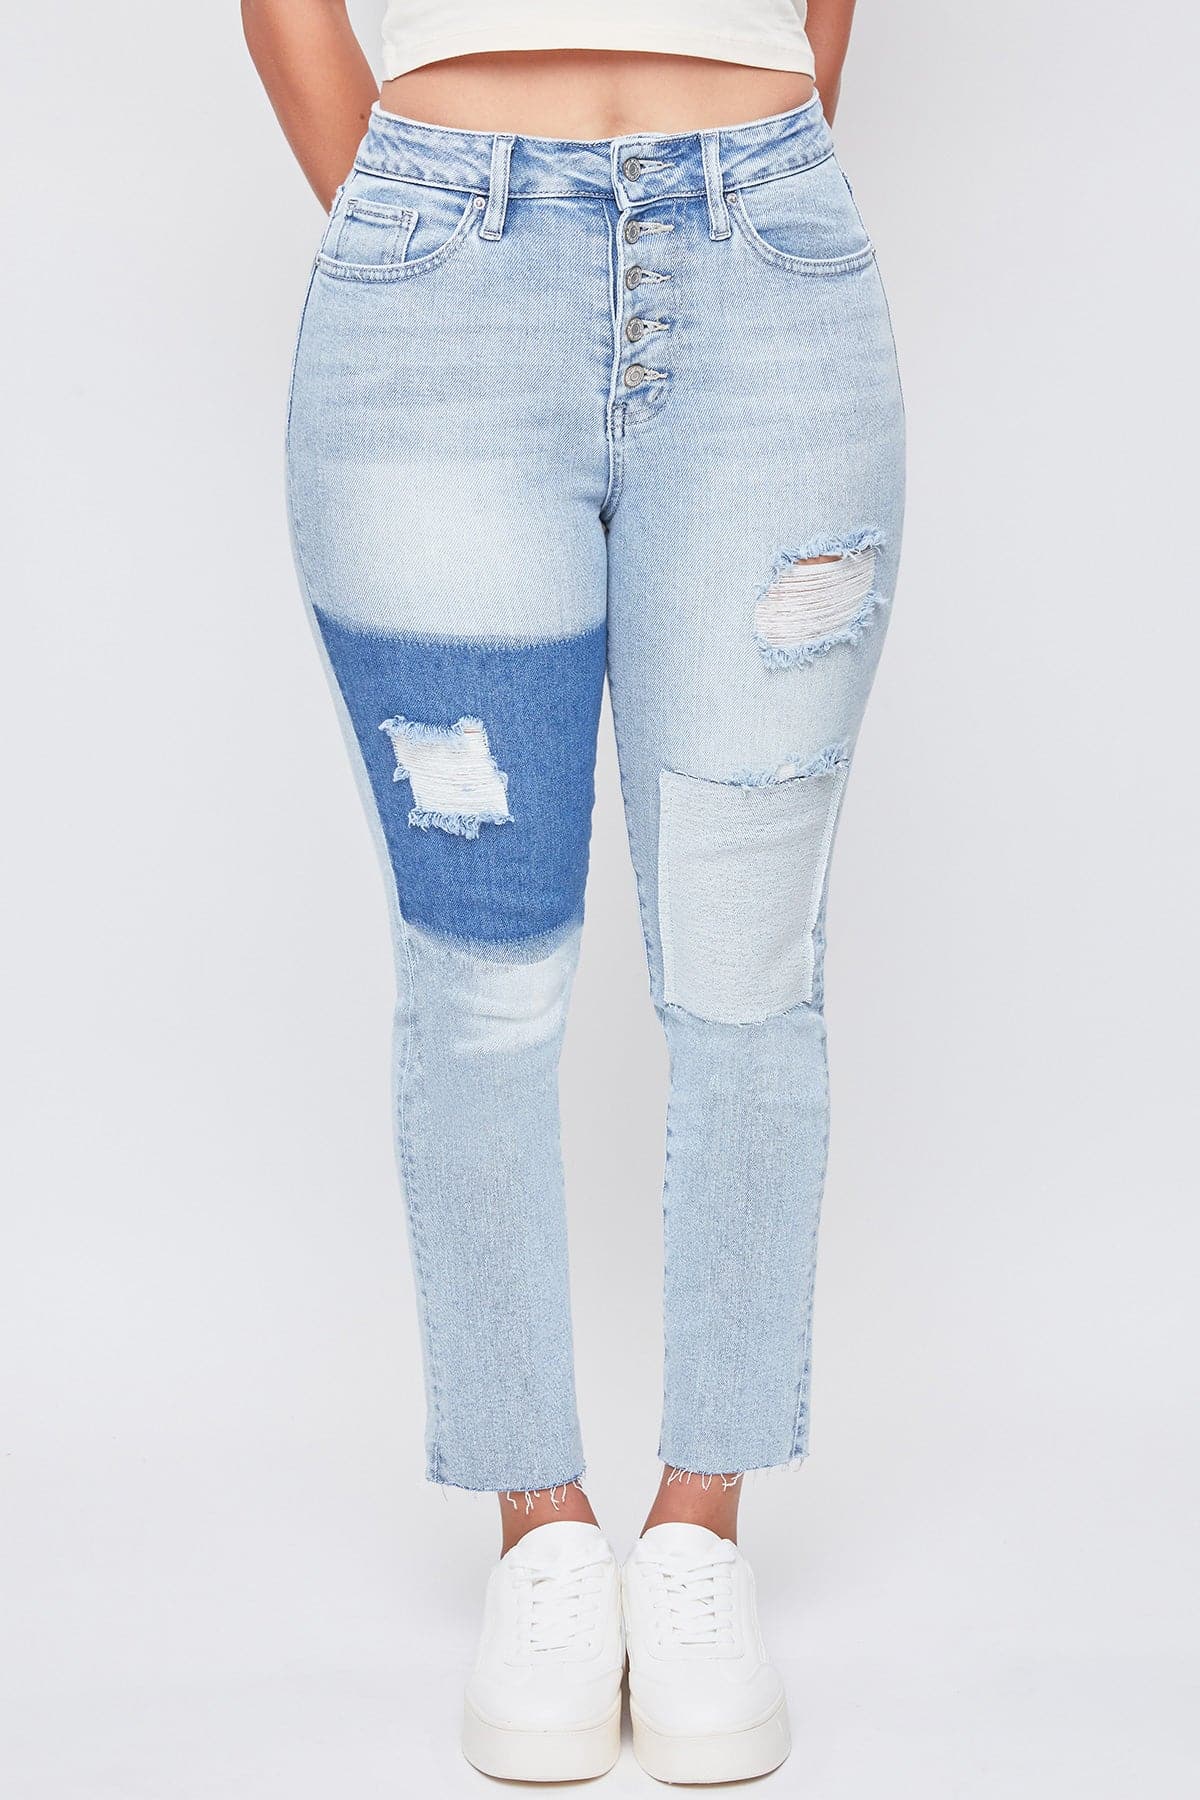 Women’s Vintage Dream Exposed Button Fly Raw Hem Ankle Jeans - Sale